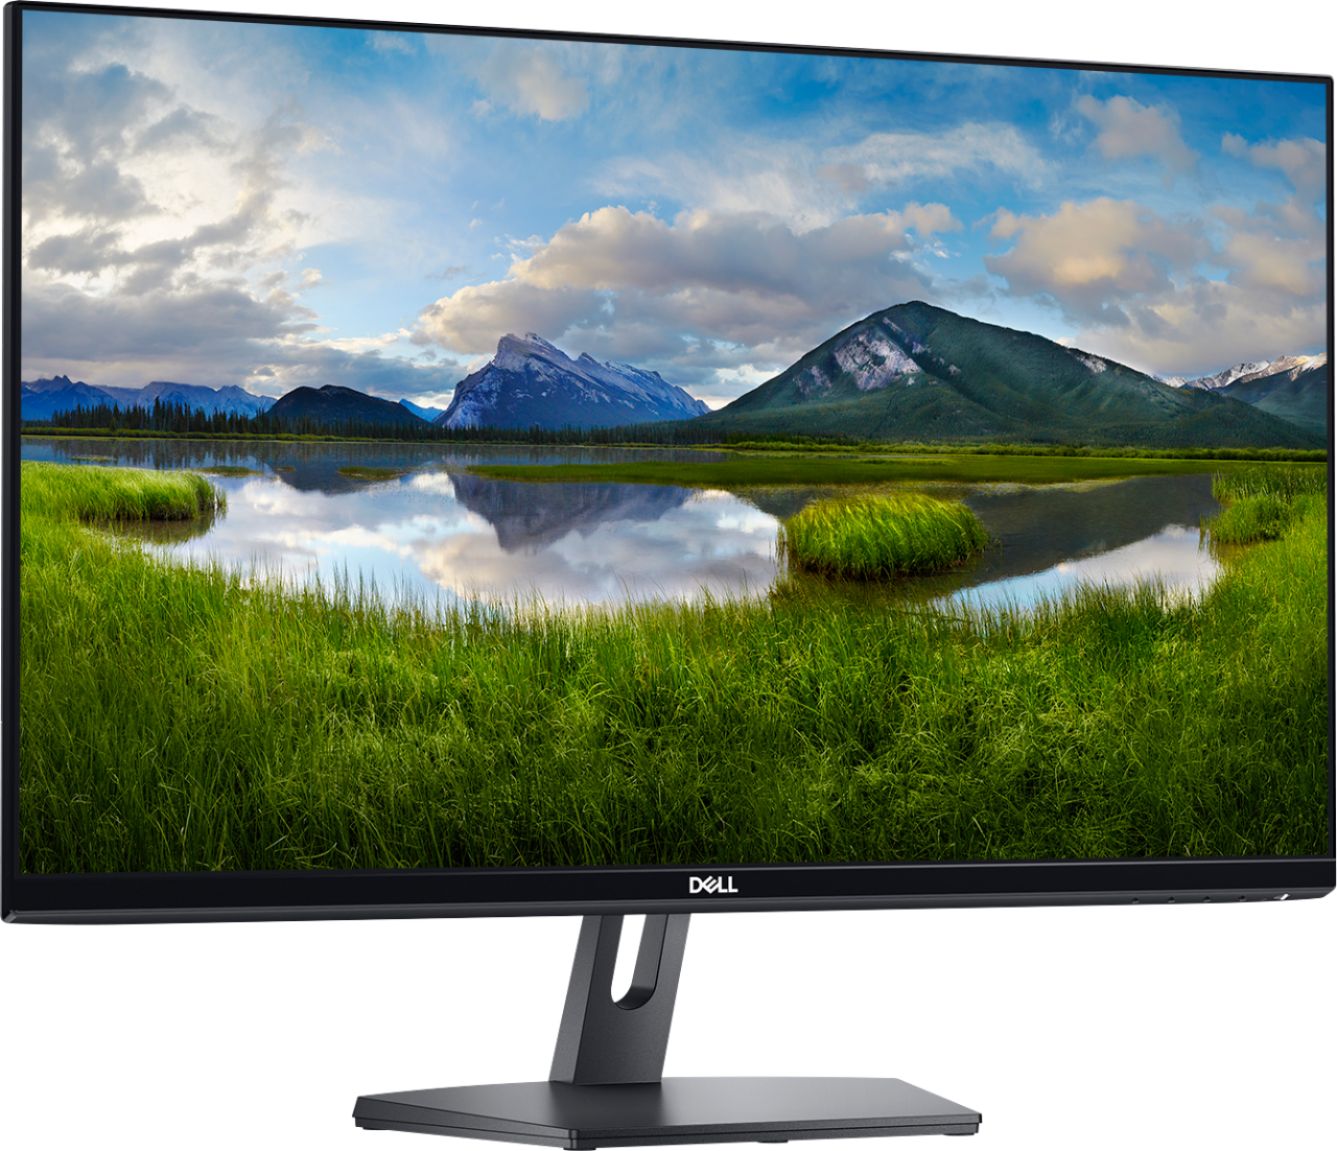 Angle View: Dell - Geek Squad Certified Refurbished 27" IPS LED FHD FreeSync Monitor - Piano Black